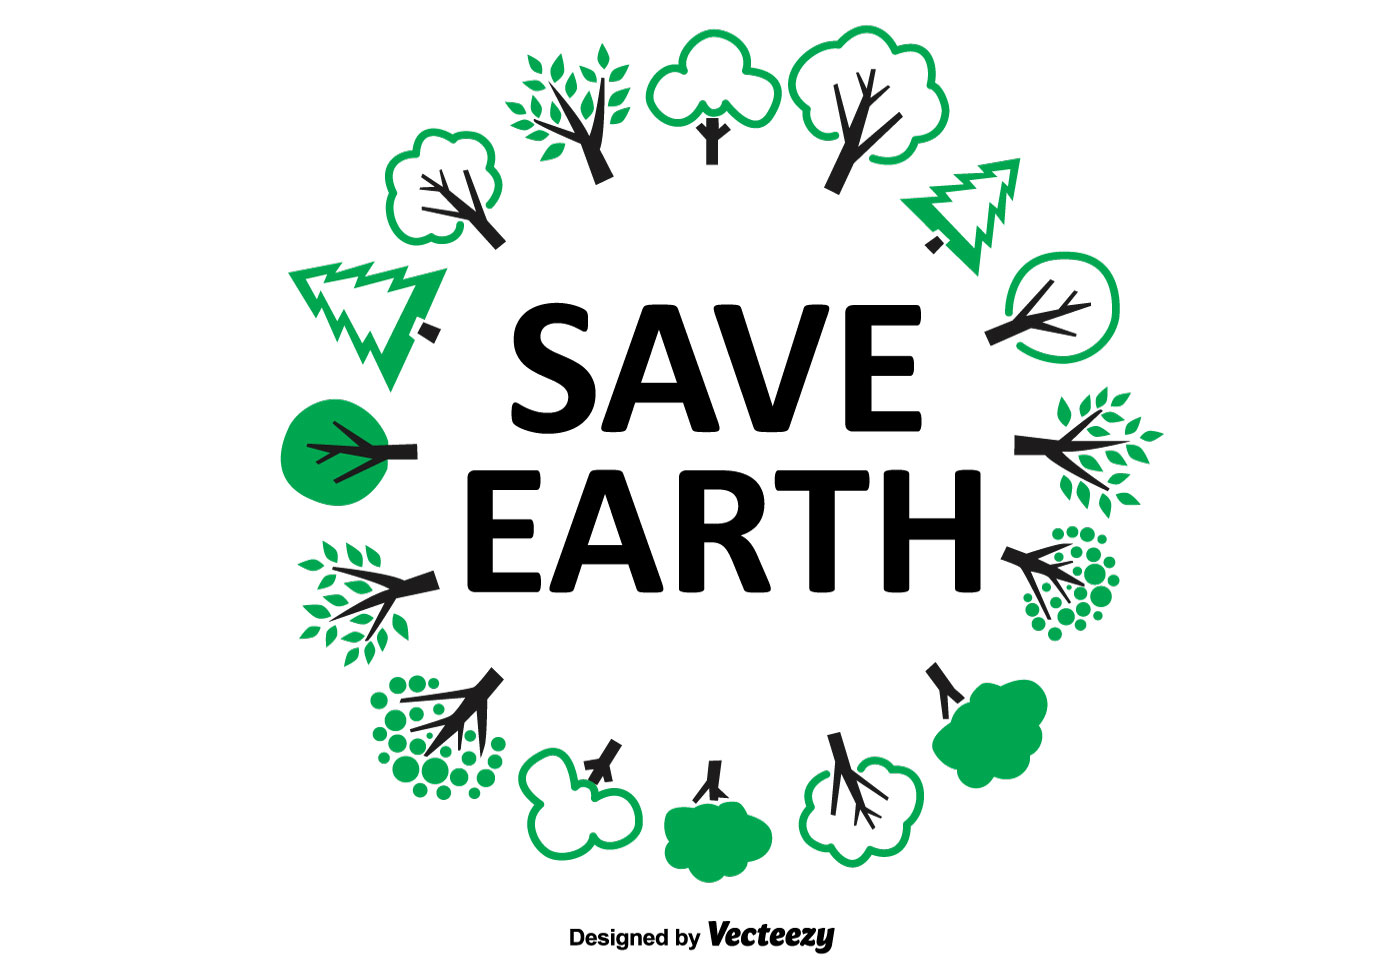 clipart images on save earth - photo #48